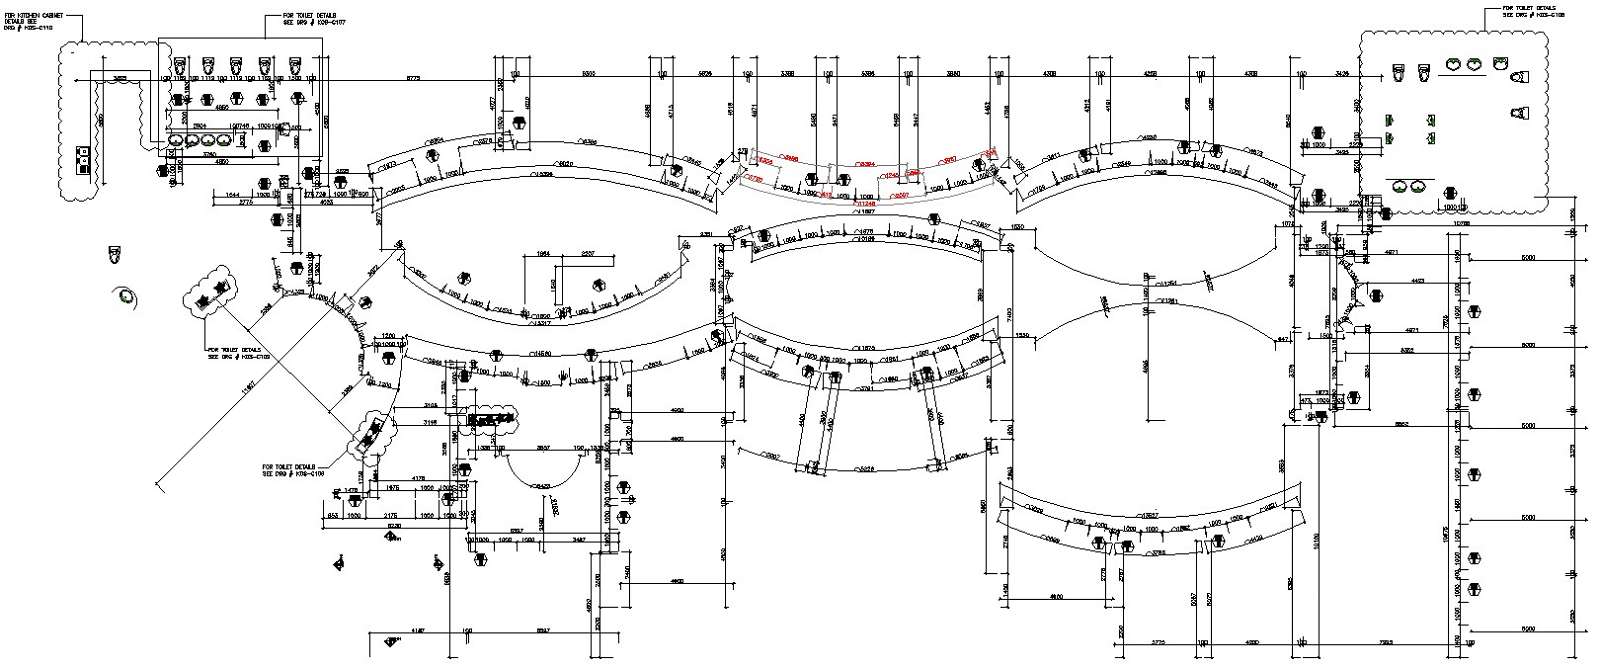 Autocad 2D construction site layout drawing with a location plan